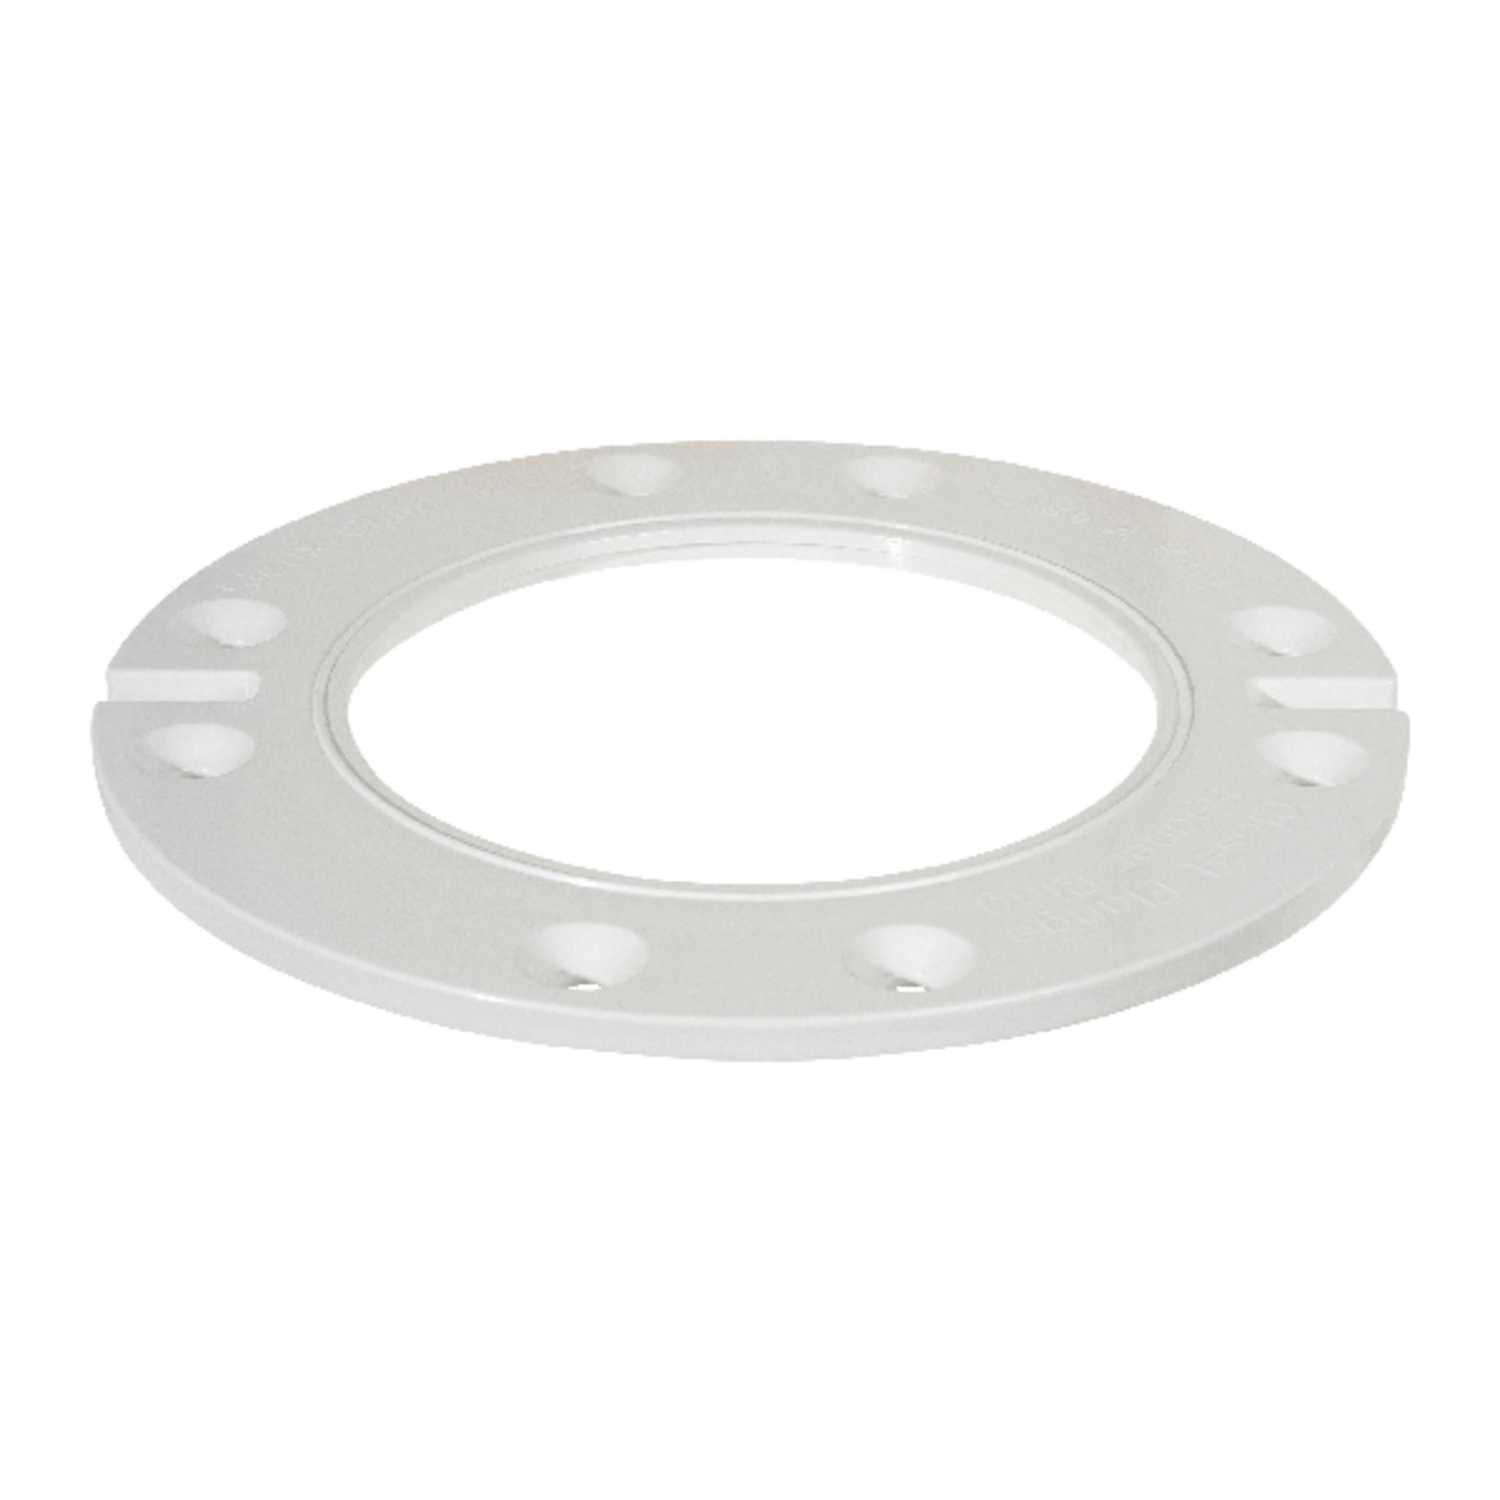 Sioux Chief Abs Closet Flange Extension Ring Ace Hardware 3095